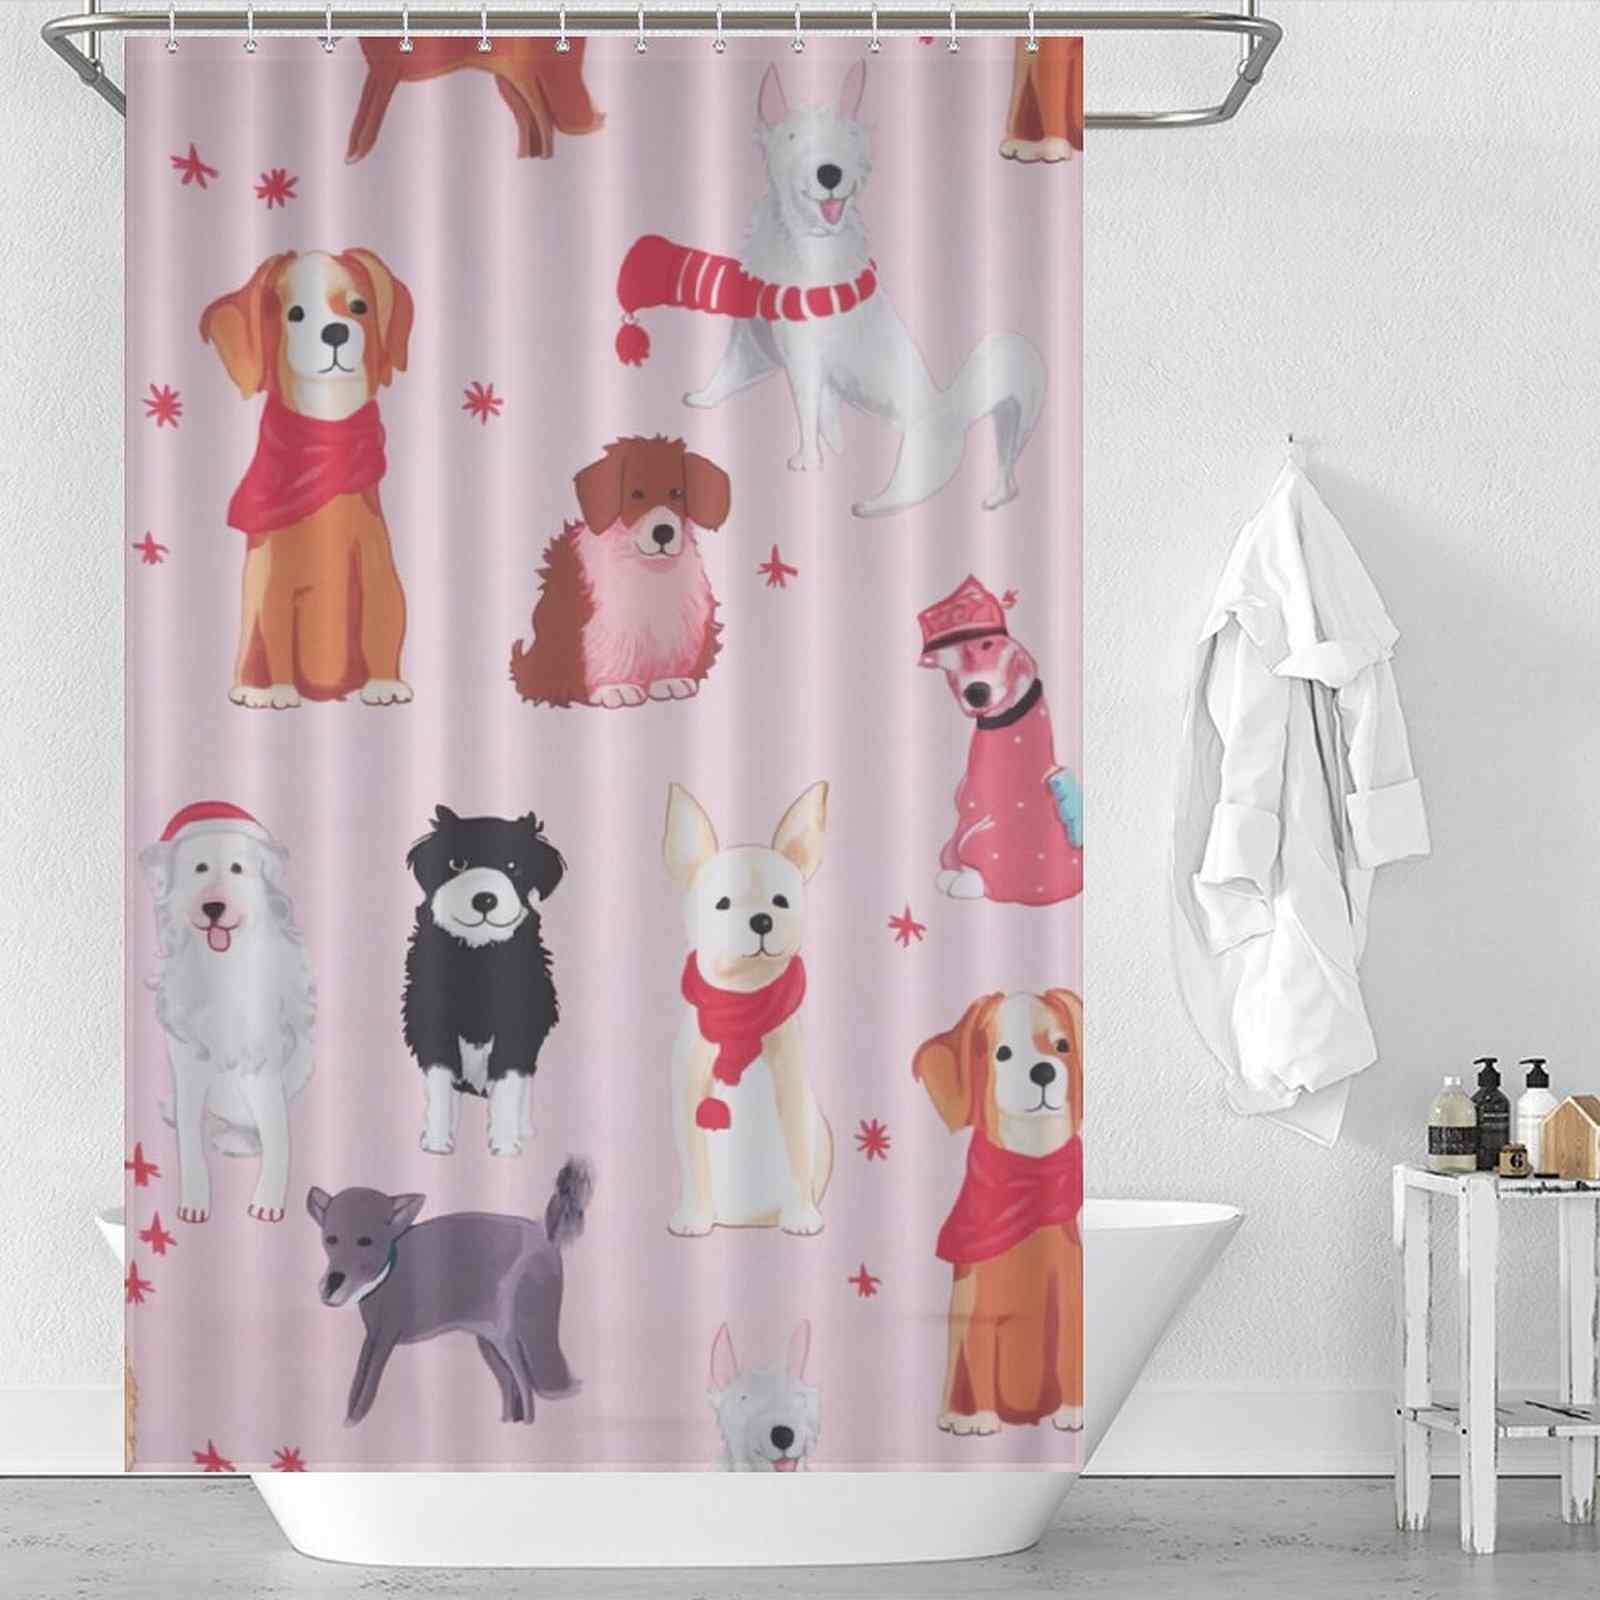 A pink shower curtain with many dogs on it.